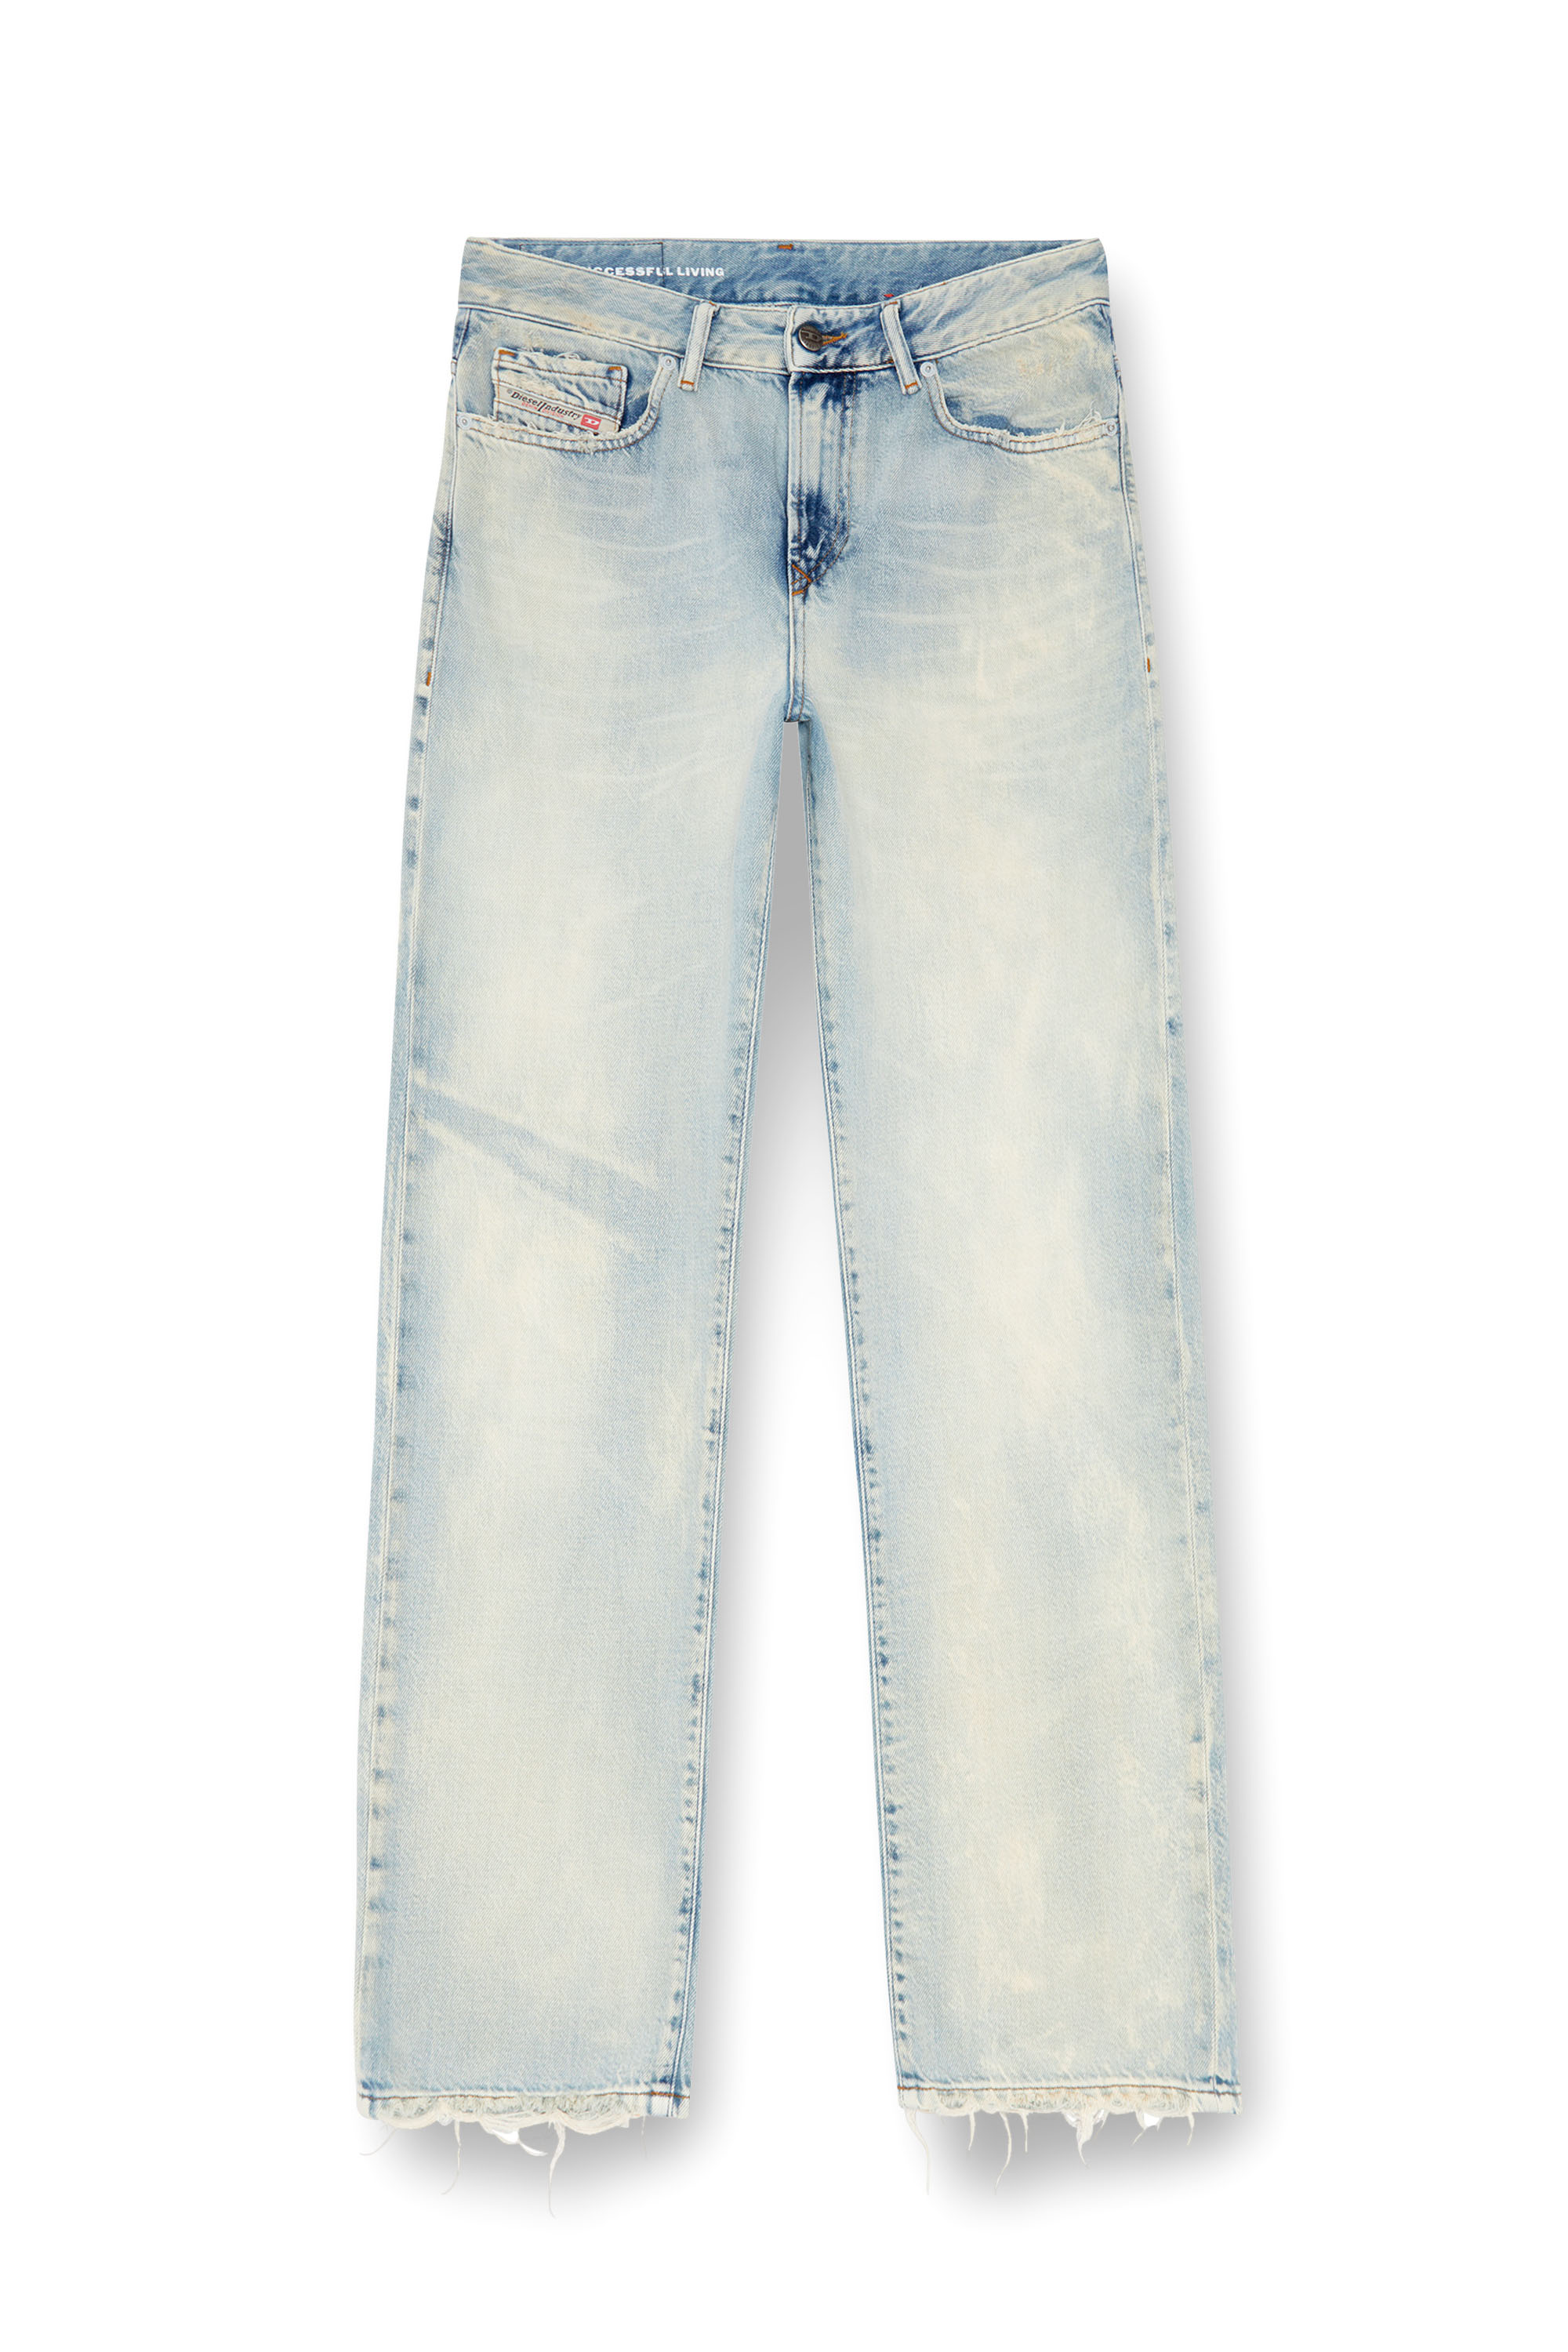 Diesel - Straight Jeans 1999 D-Reggy 09J89, Mujer Straight Jeans - 1999 D-Reggy in Azul marino - Image 3